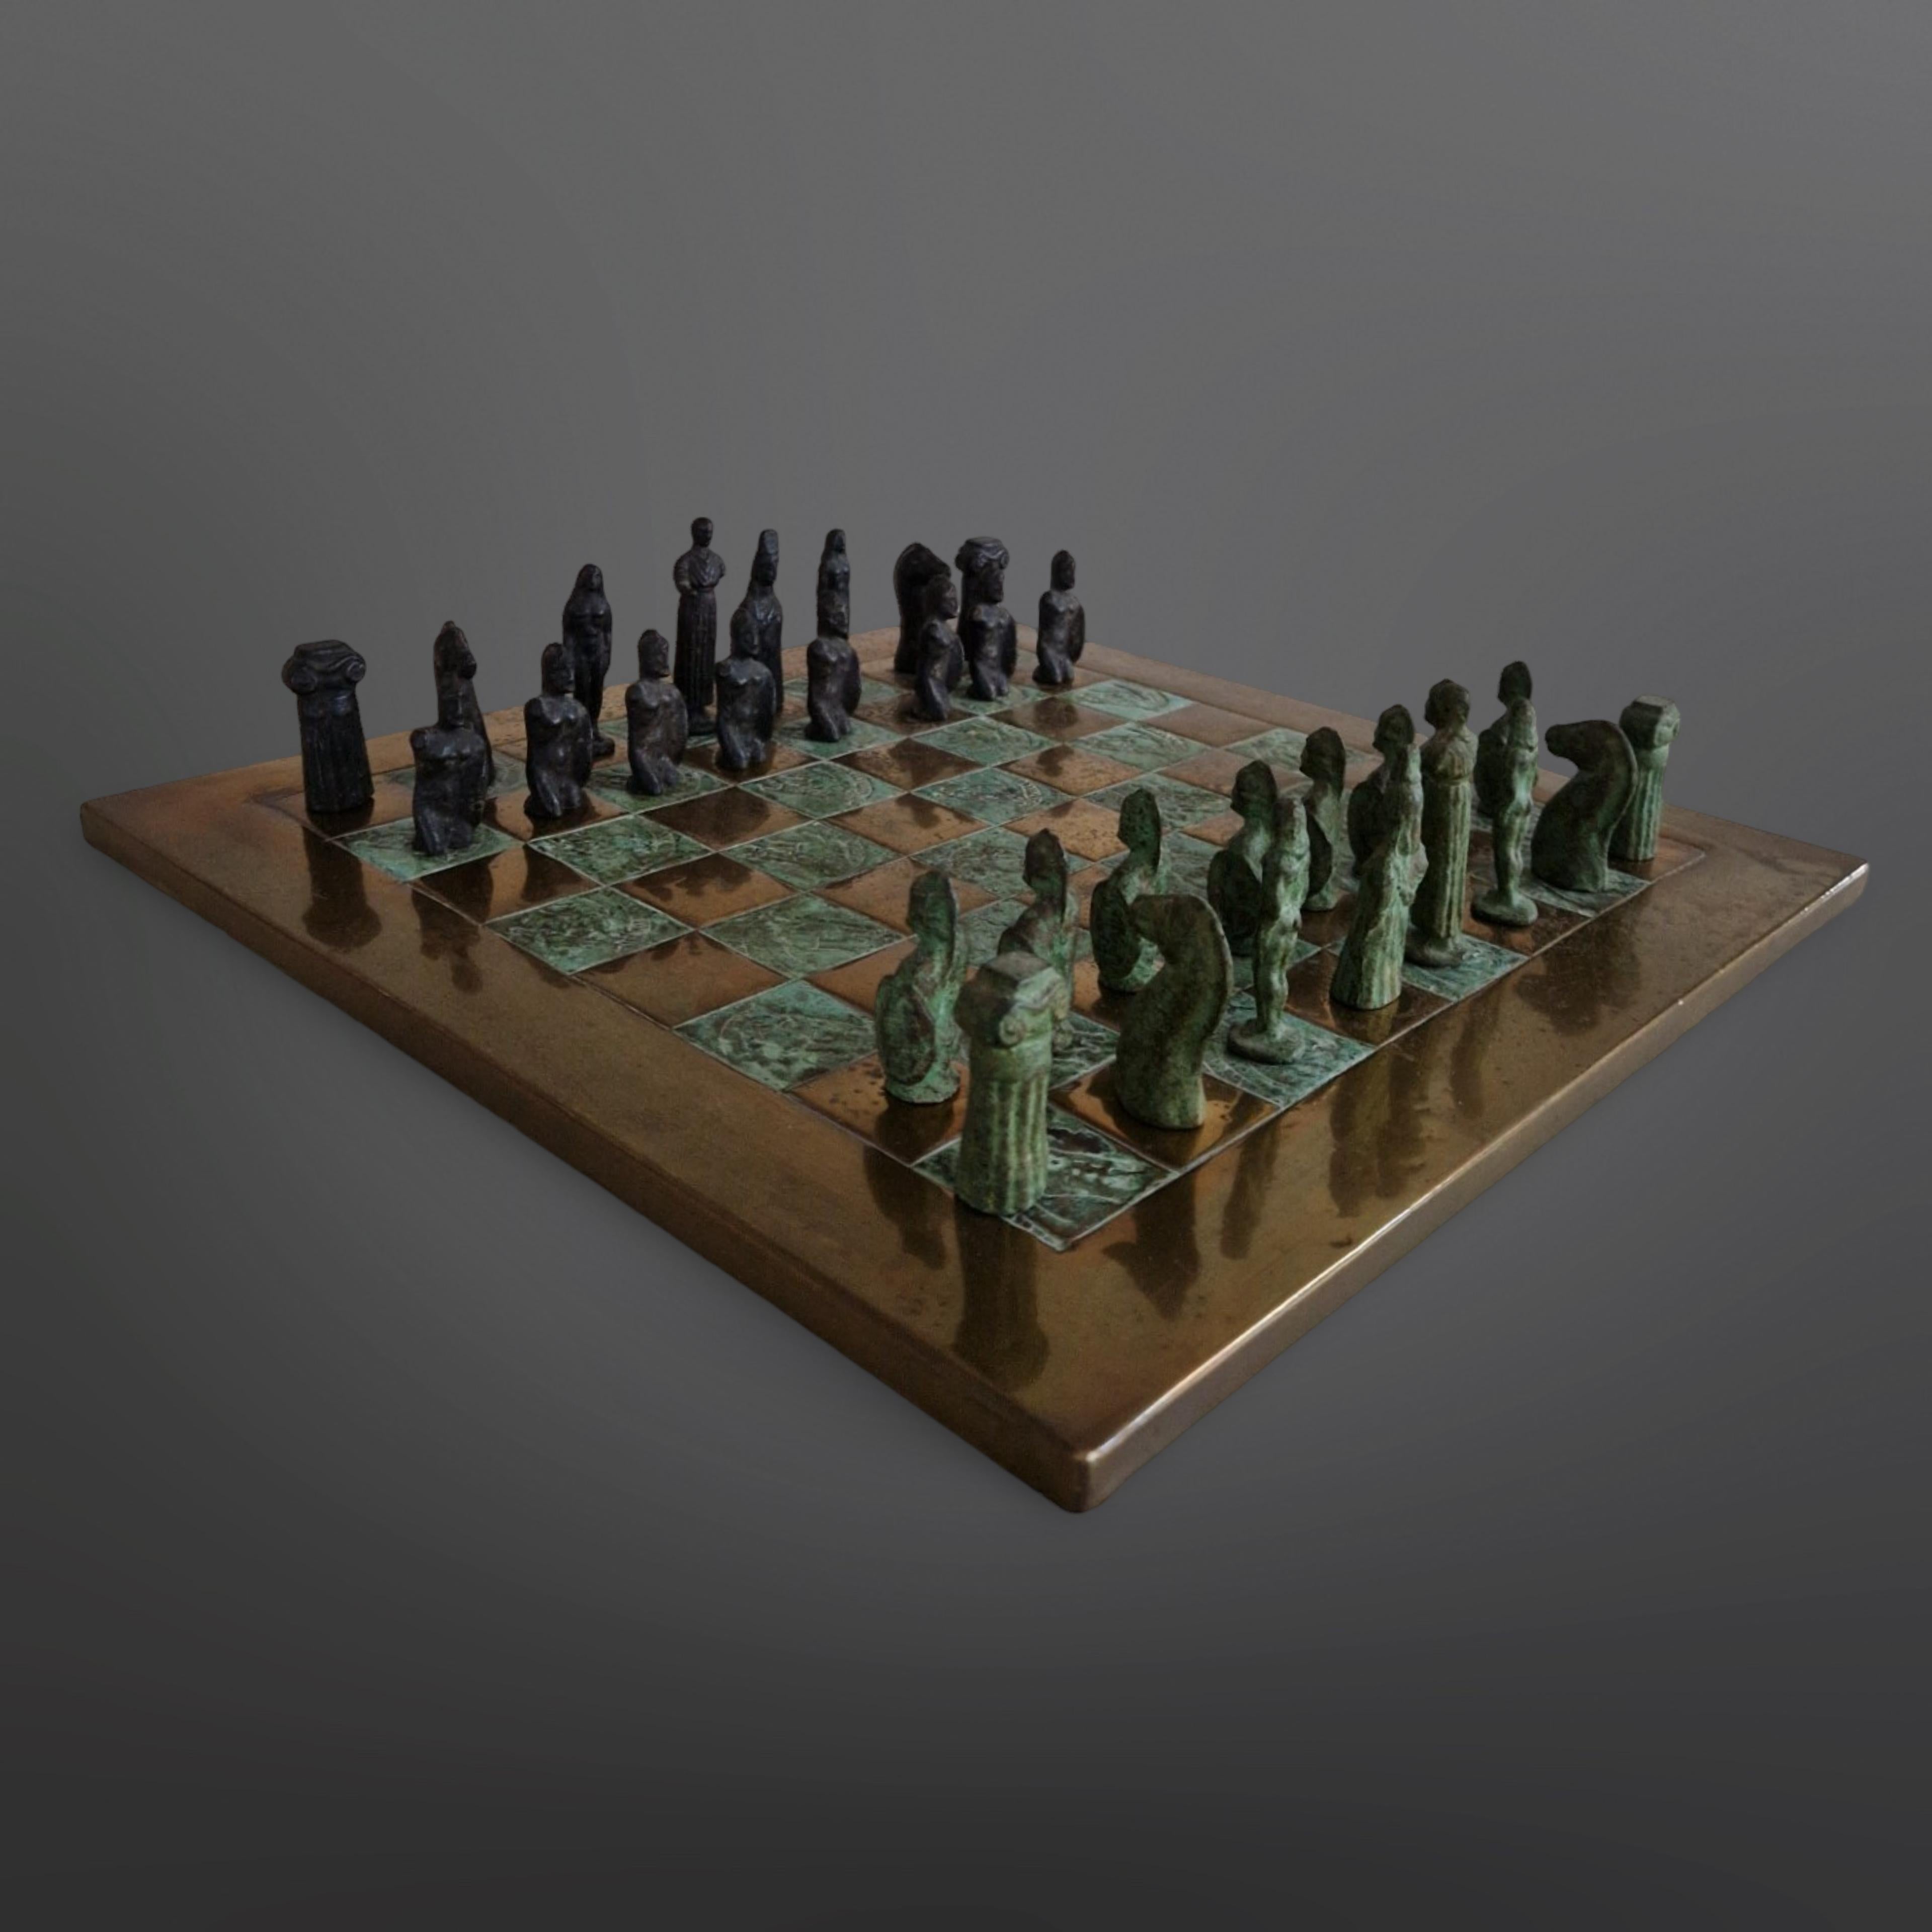 Cast Brutalist cast bronze chess set with copper board, 1960s